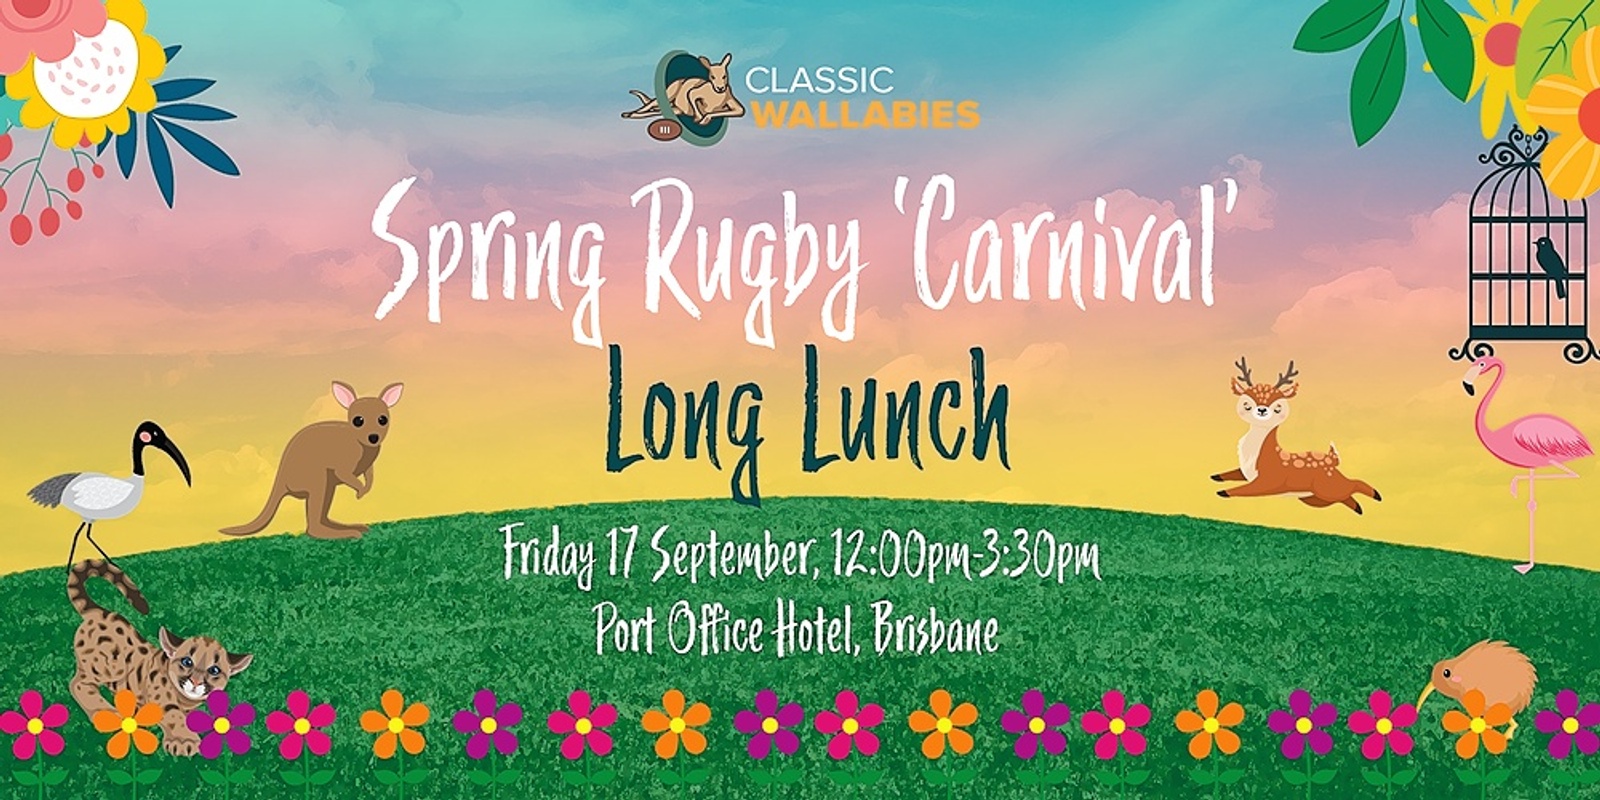 Banner image for Spring 'Carnival' Rugby Long Lunch